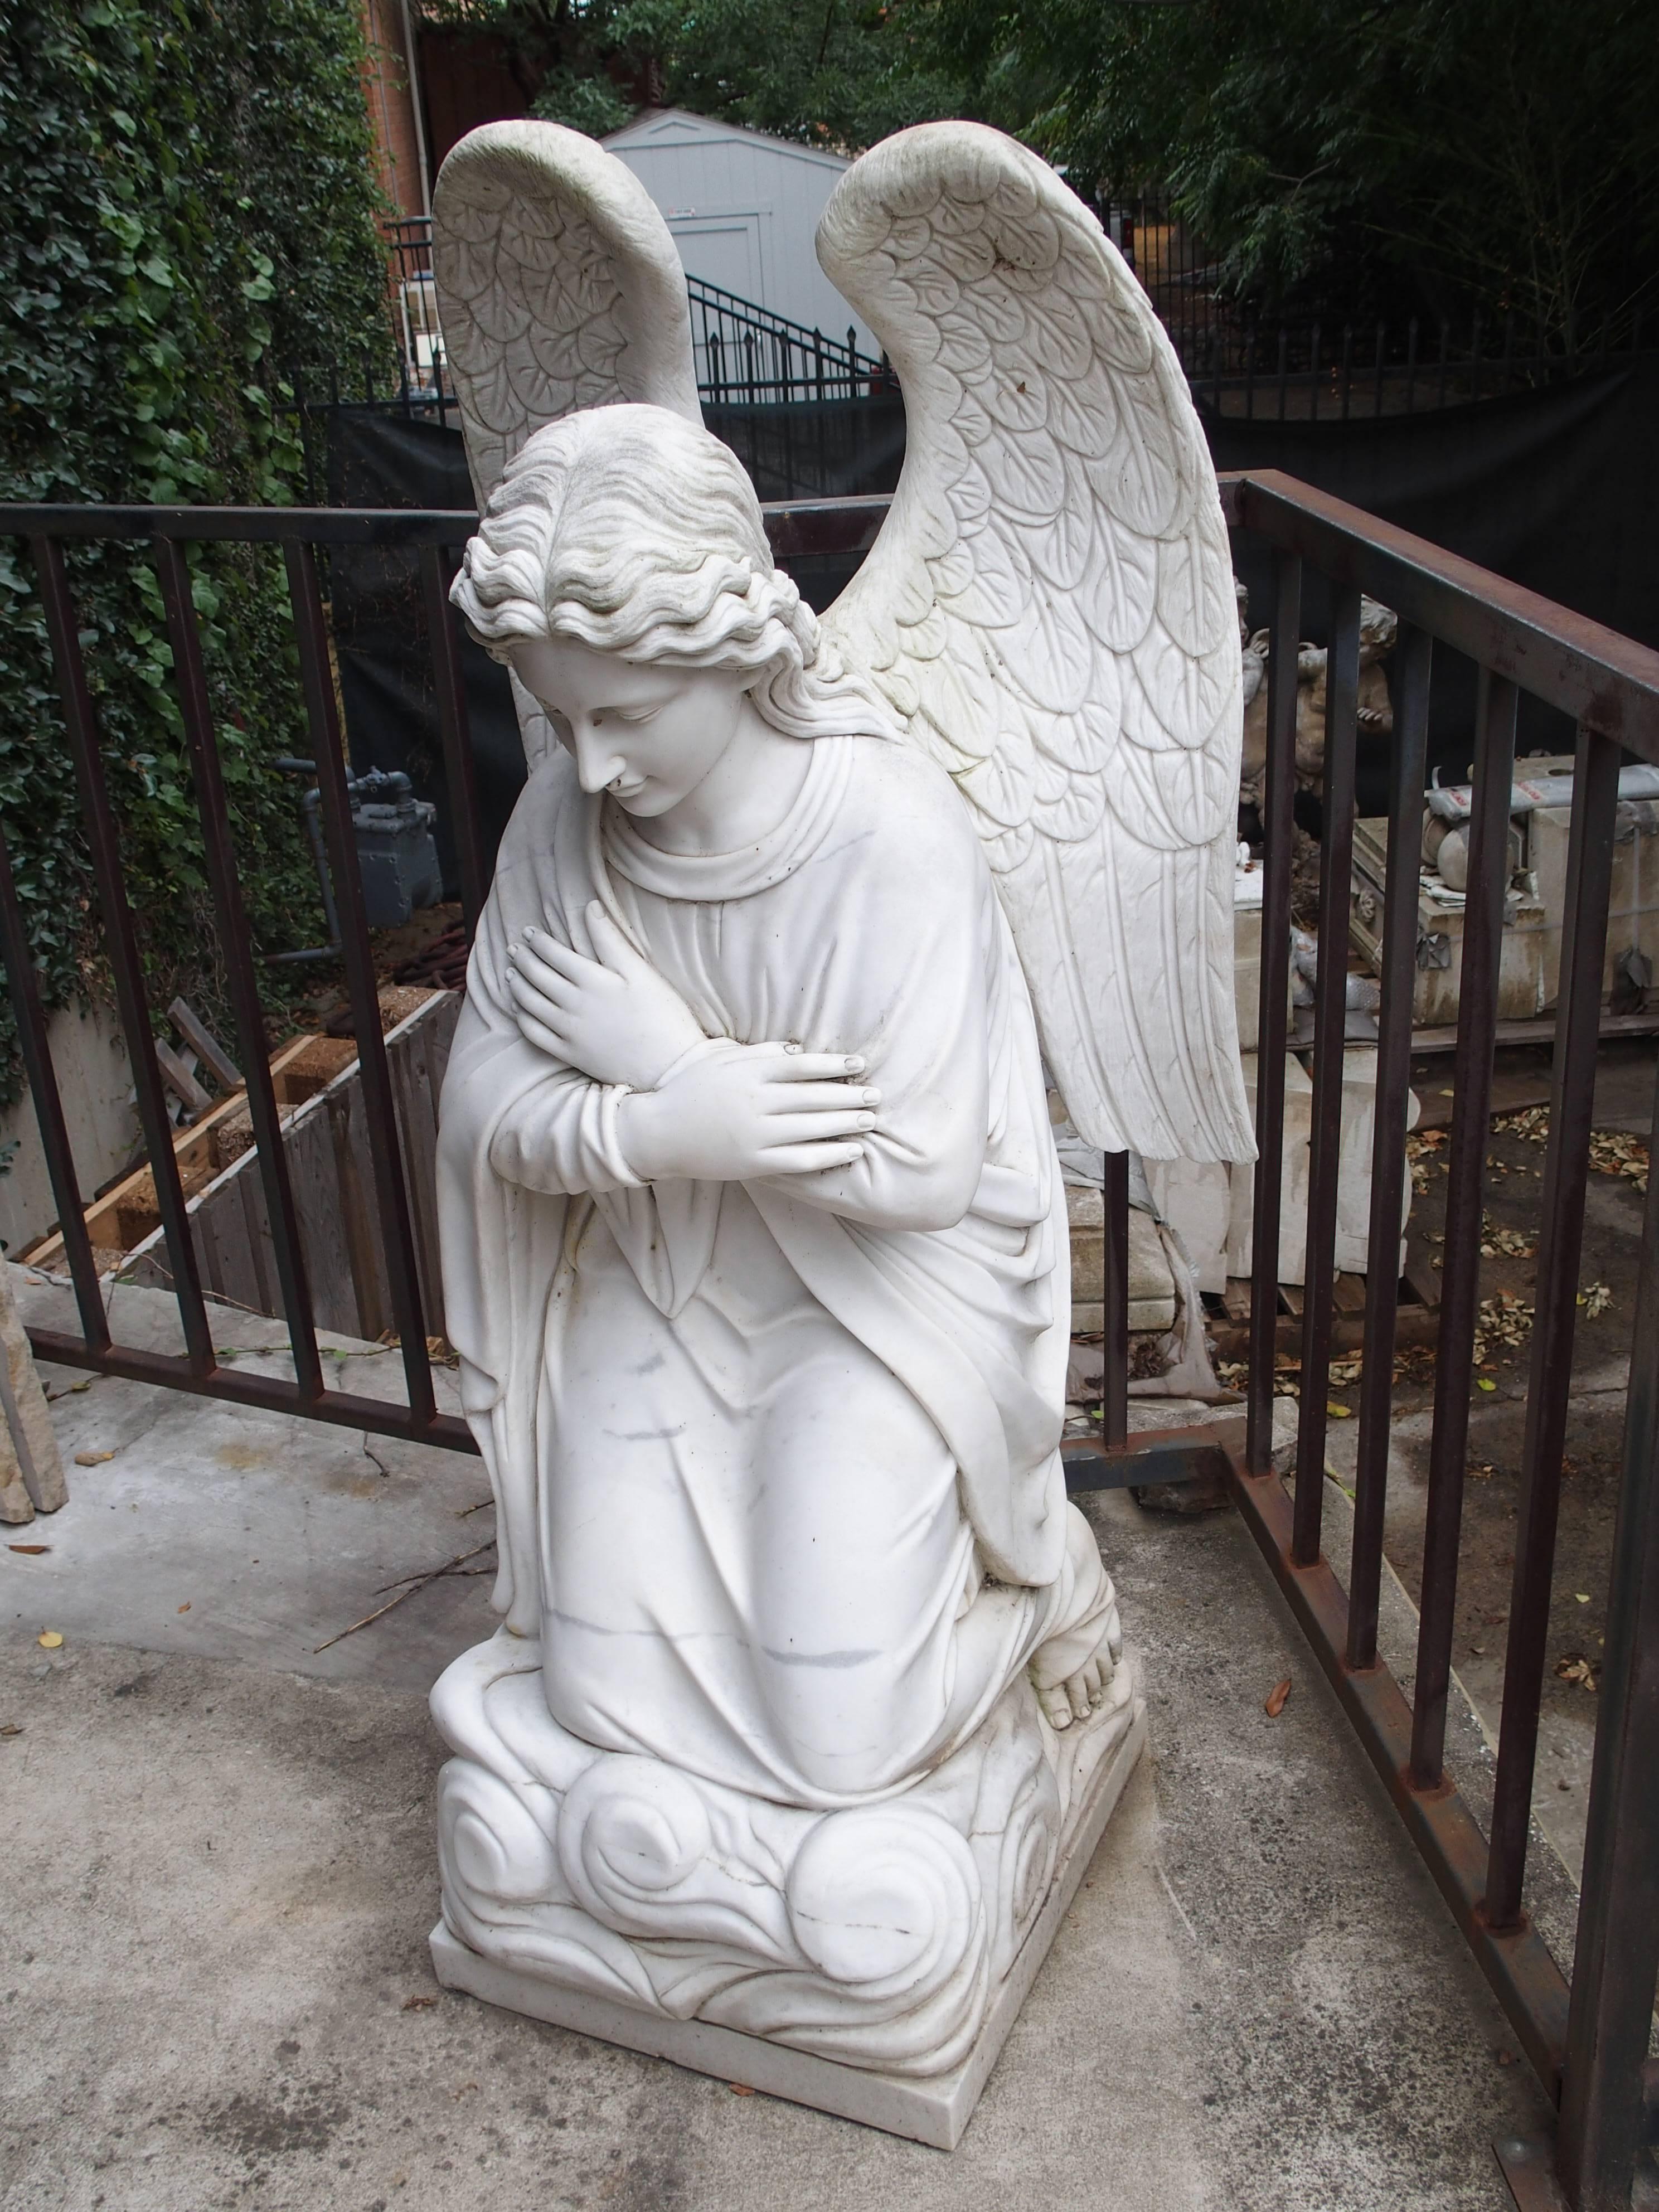 This large kneeling angel has been carved from a massive single piece of marble. The base she is kneeling on depicts stylized clouds, while she prays with her arms crossed in front of her. On her back, her large wings rise over her head in a closed